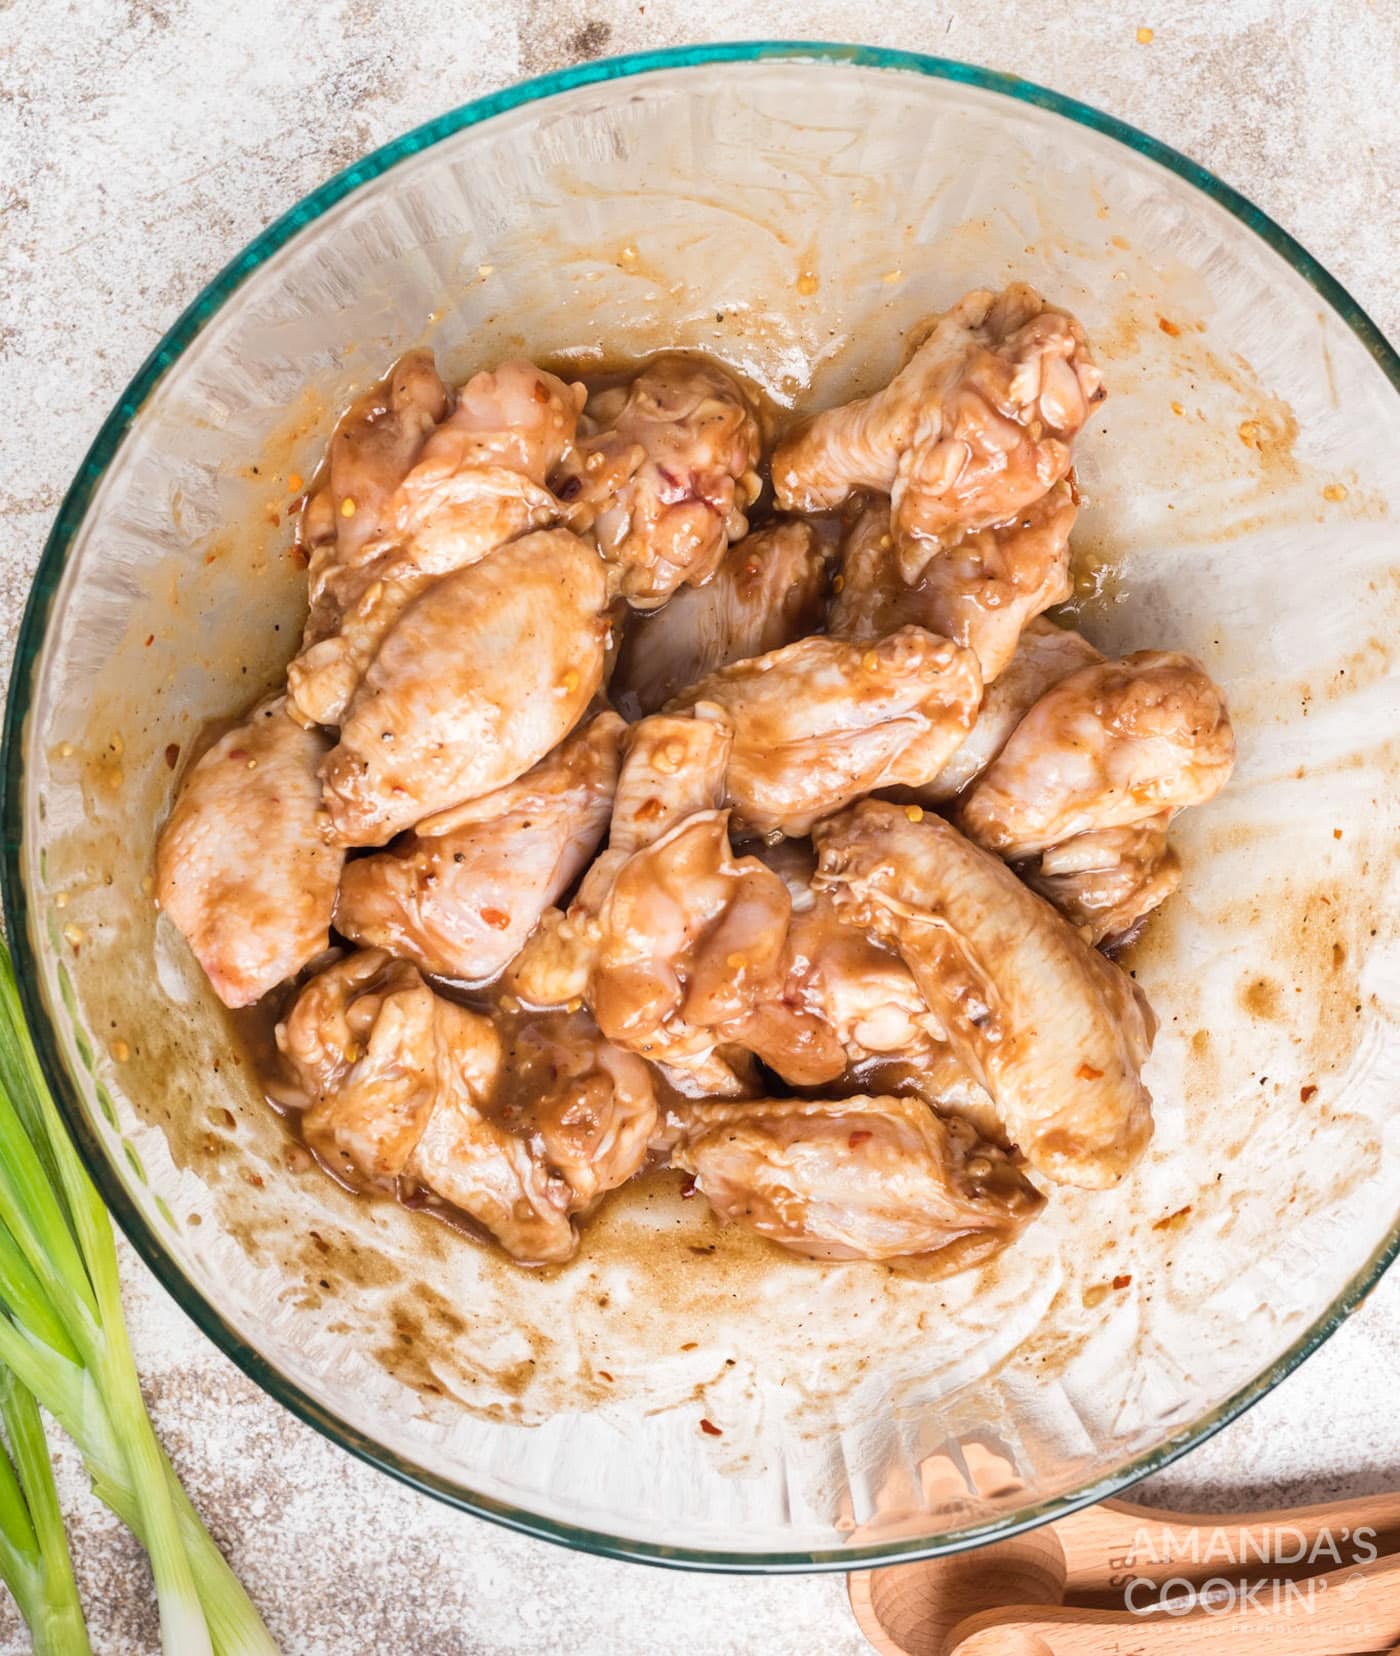 add chicken to marinade mixture and toss to coat